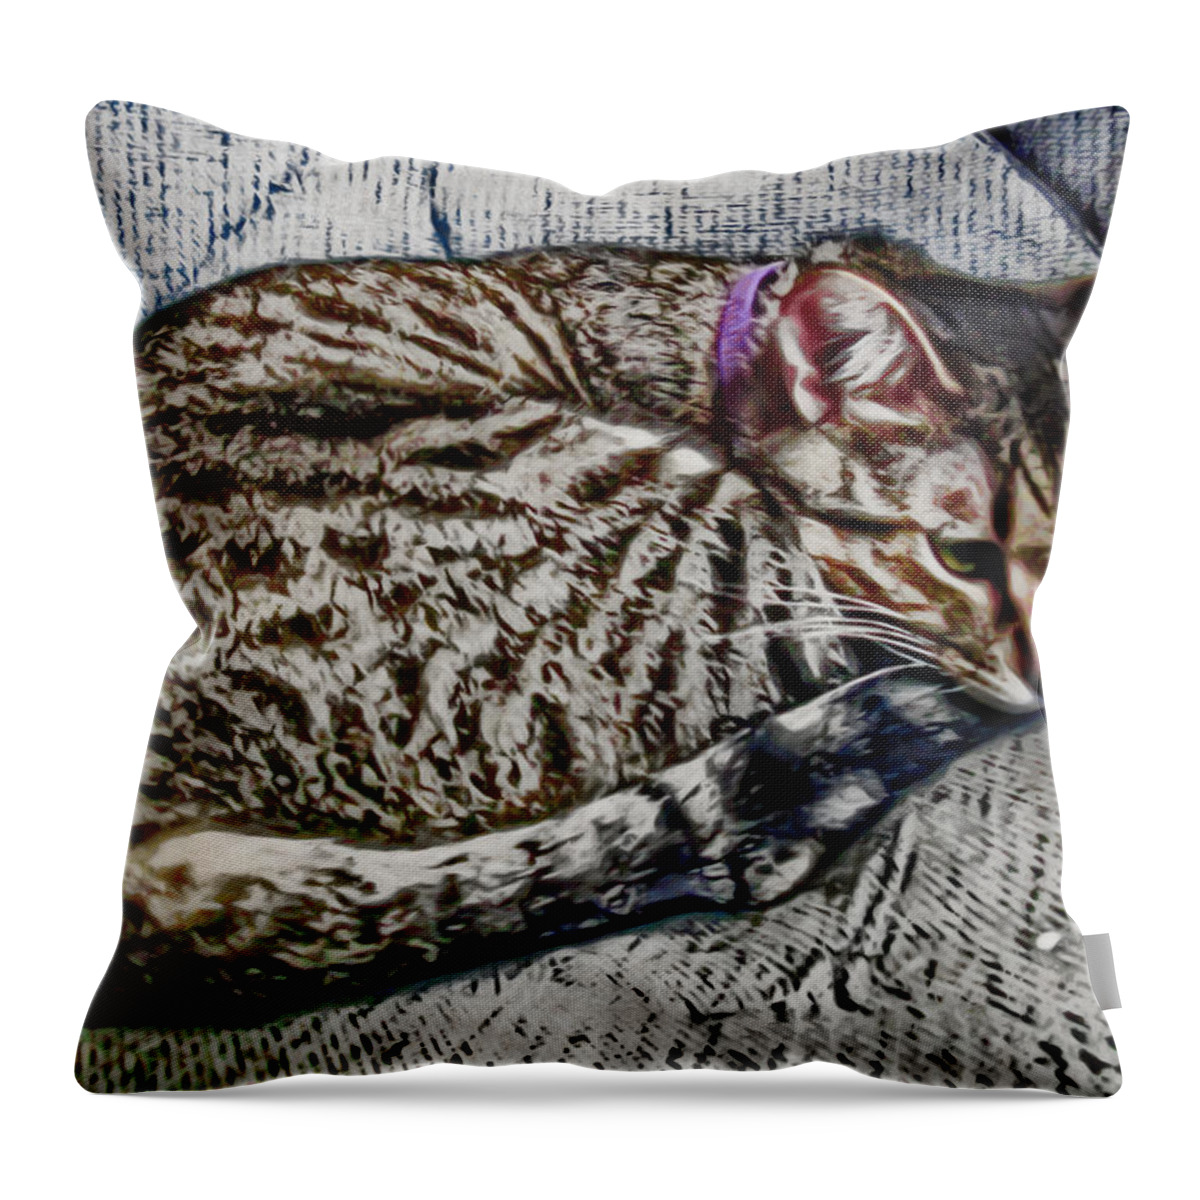 Cat Throw Pillow featuring the digital art Curled and Ready For A Nap by David G Paul